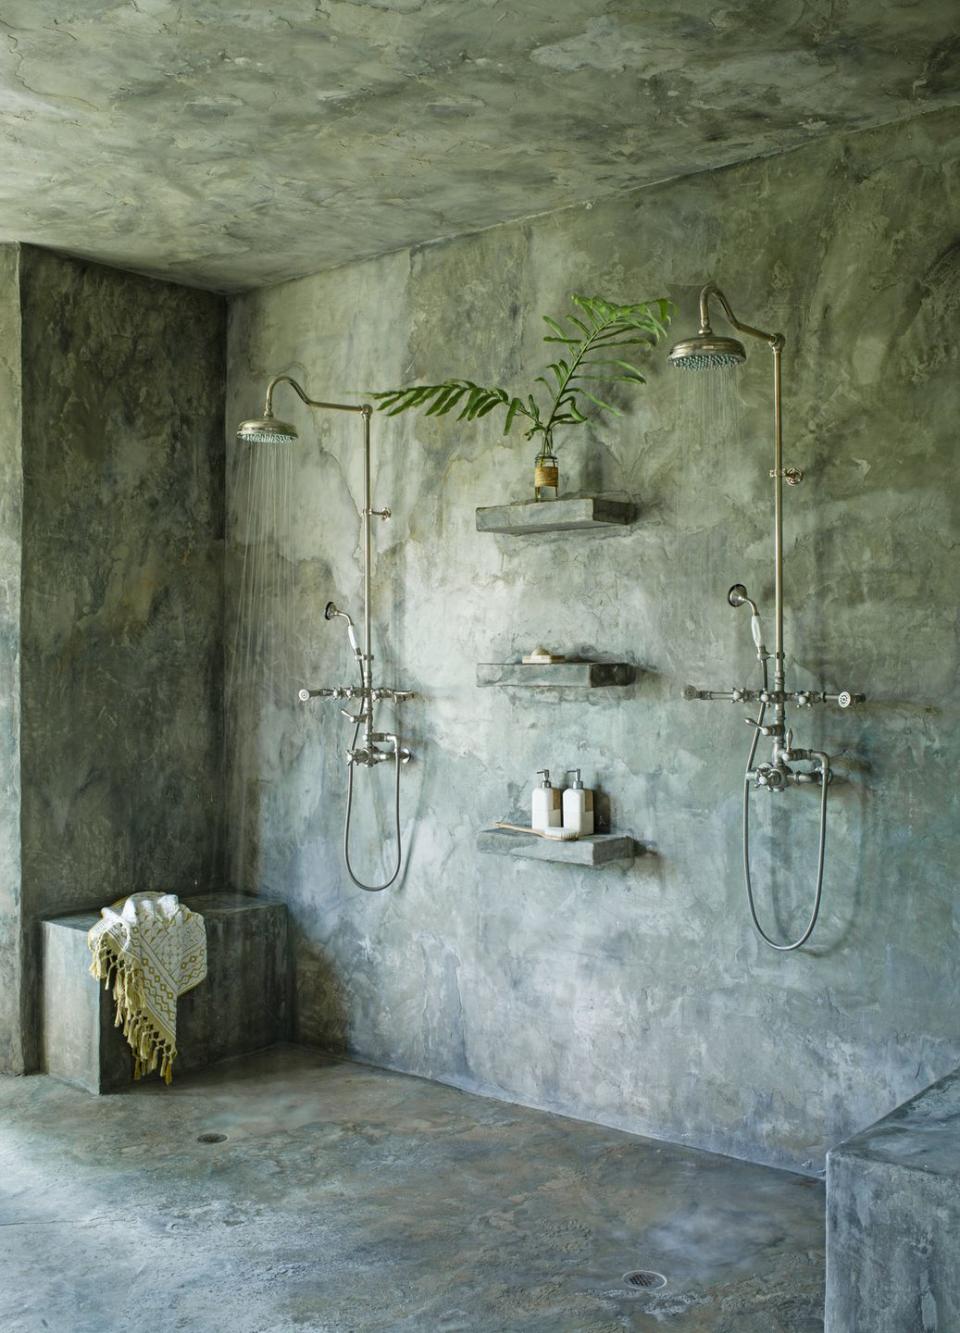 en suite bathroom i wanted it to feel calm, quiet, and seamless, says liess of the concrete, cave like shower area coated in waterproof stucco hardware existing